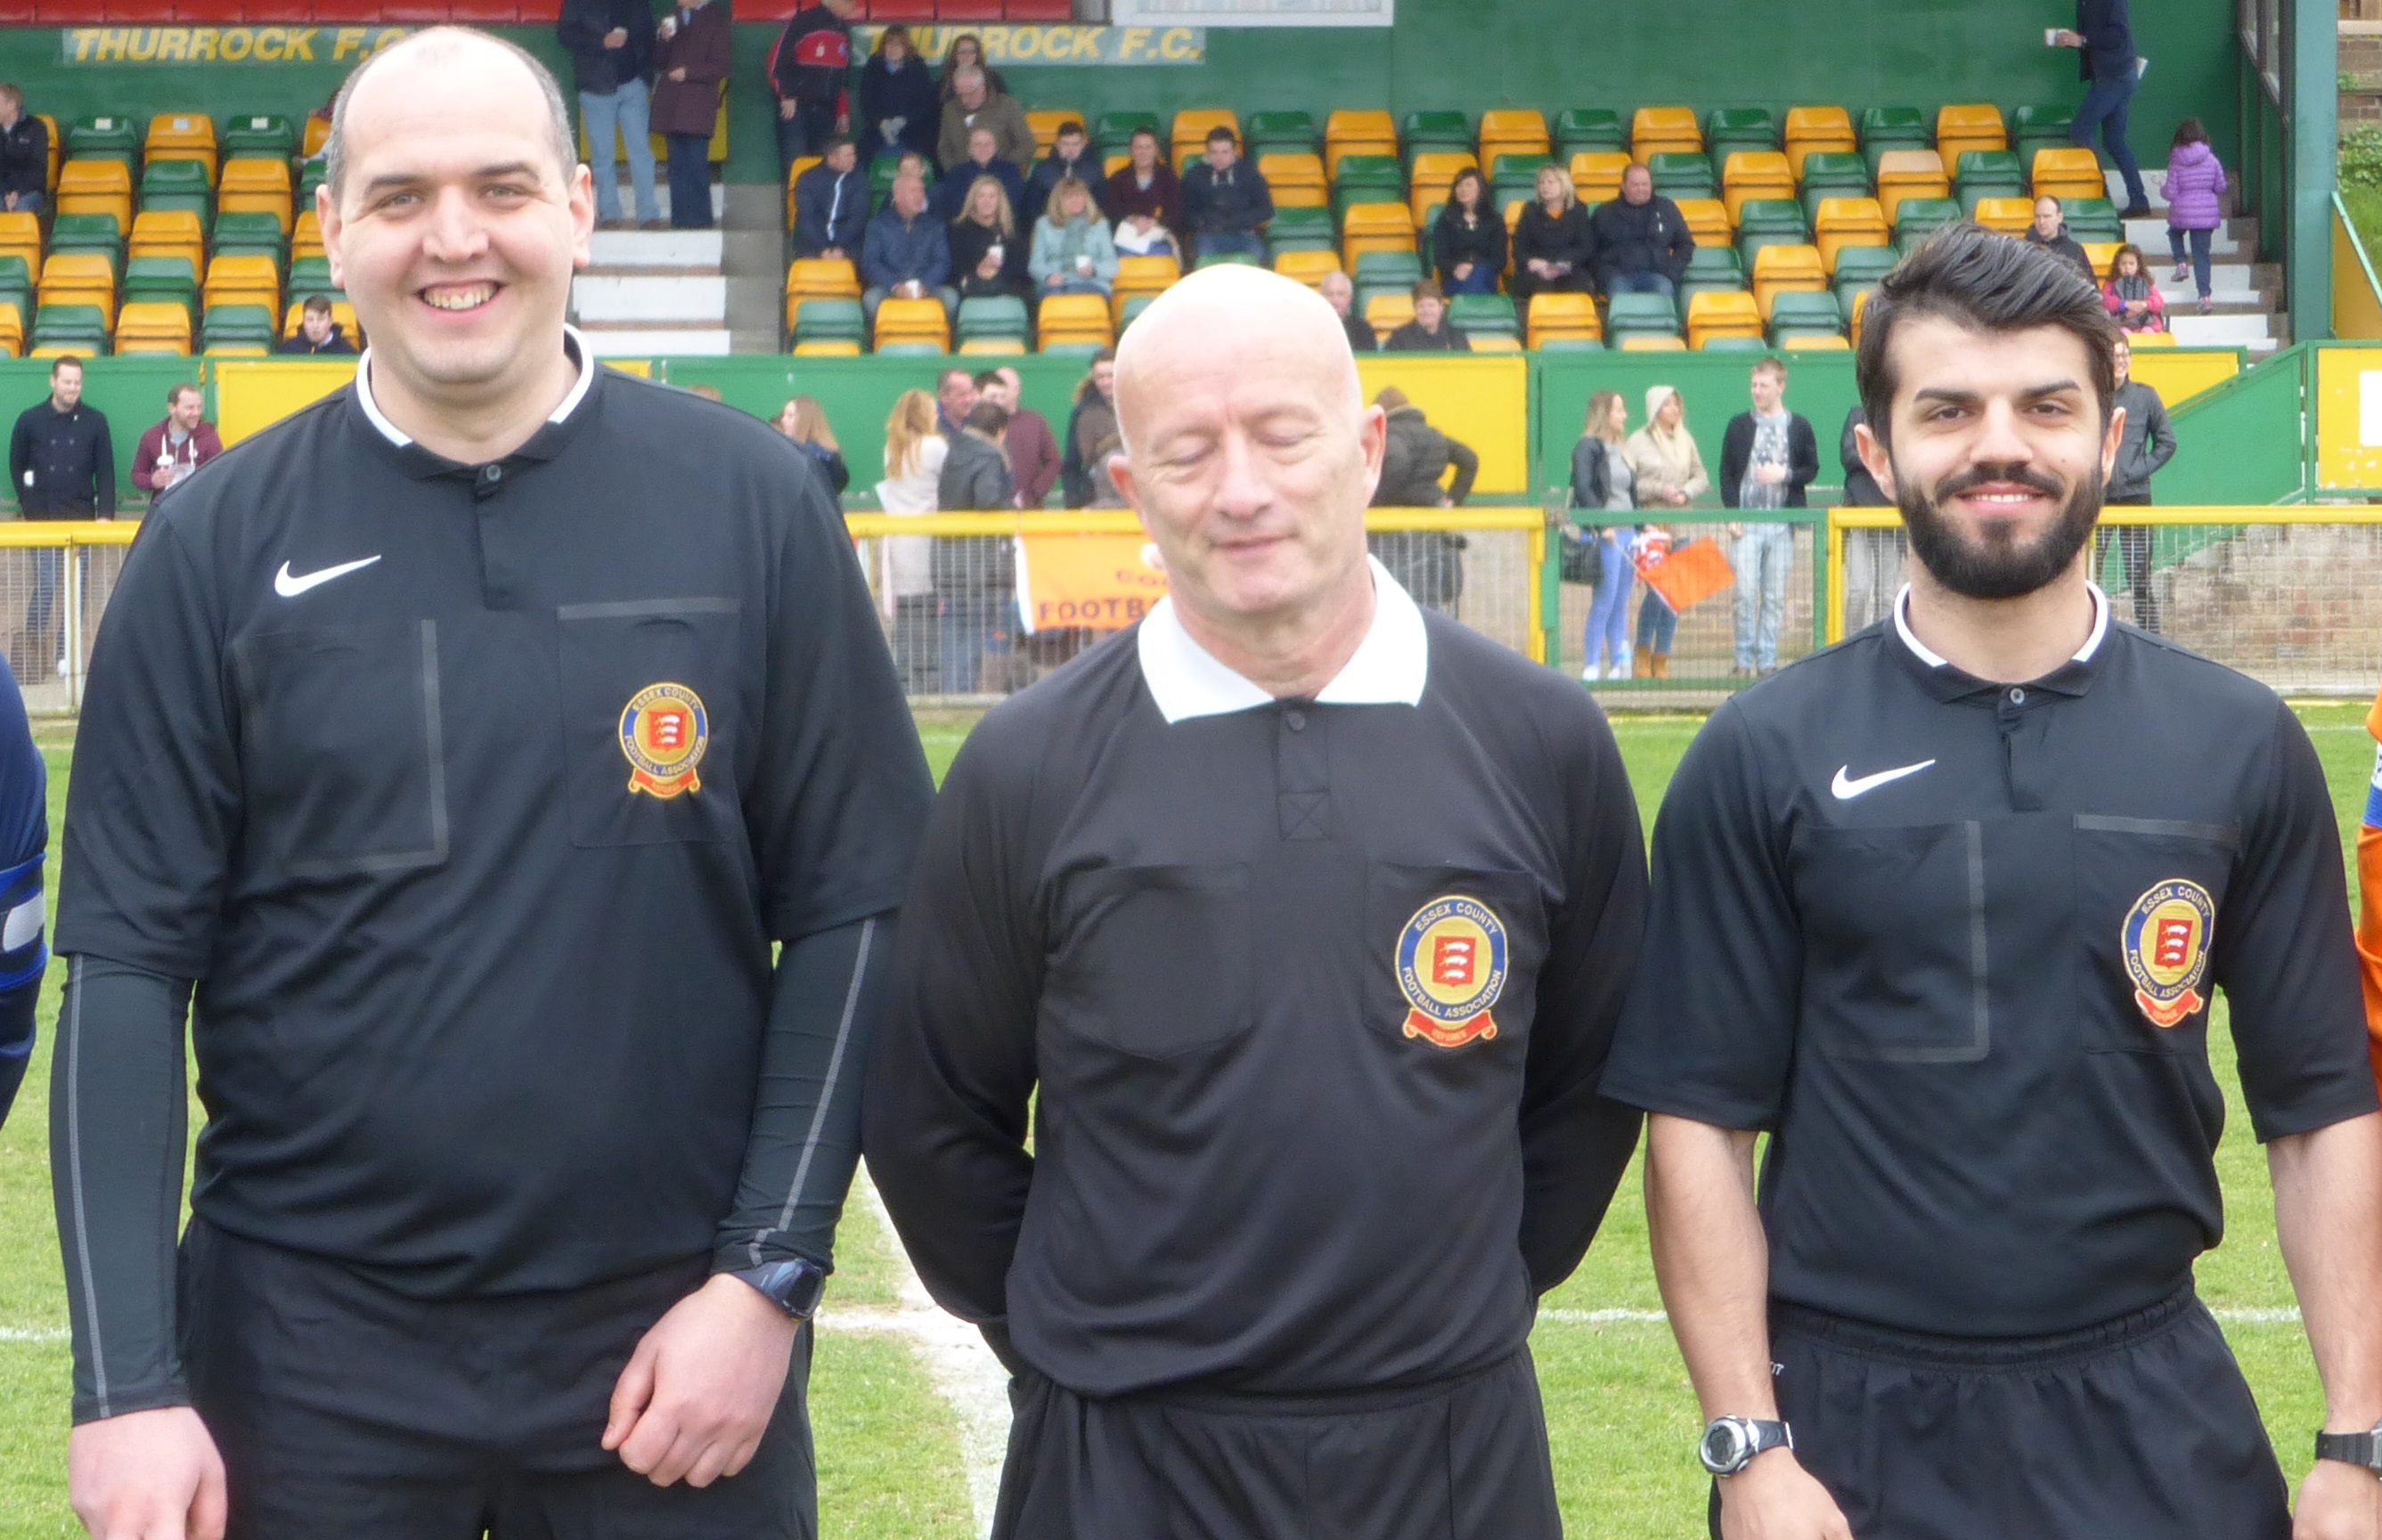 Following the expansion of our league, we welcome applications from referees